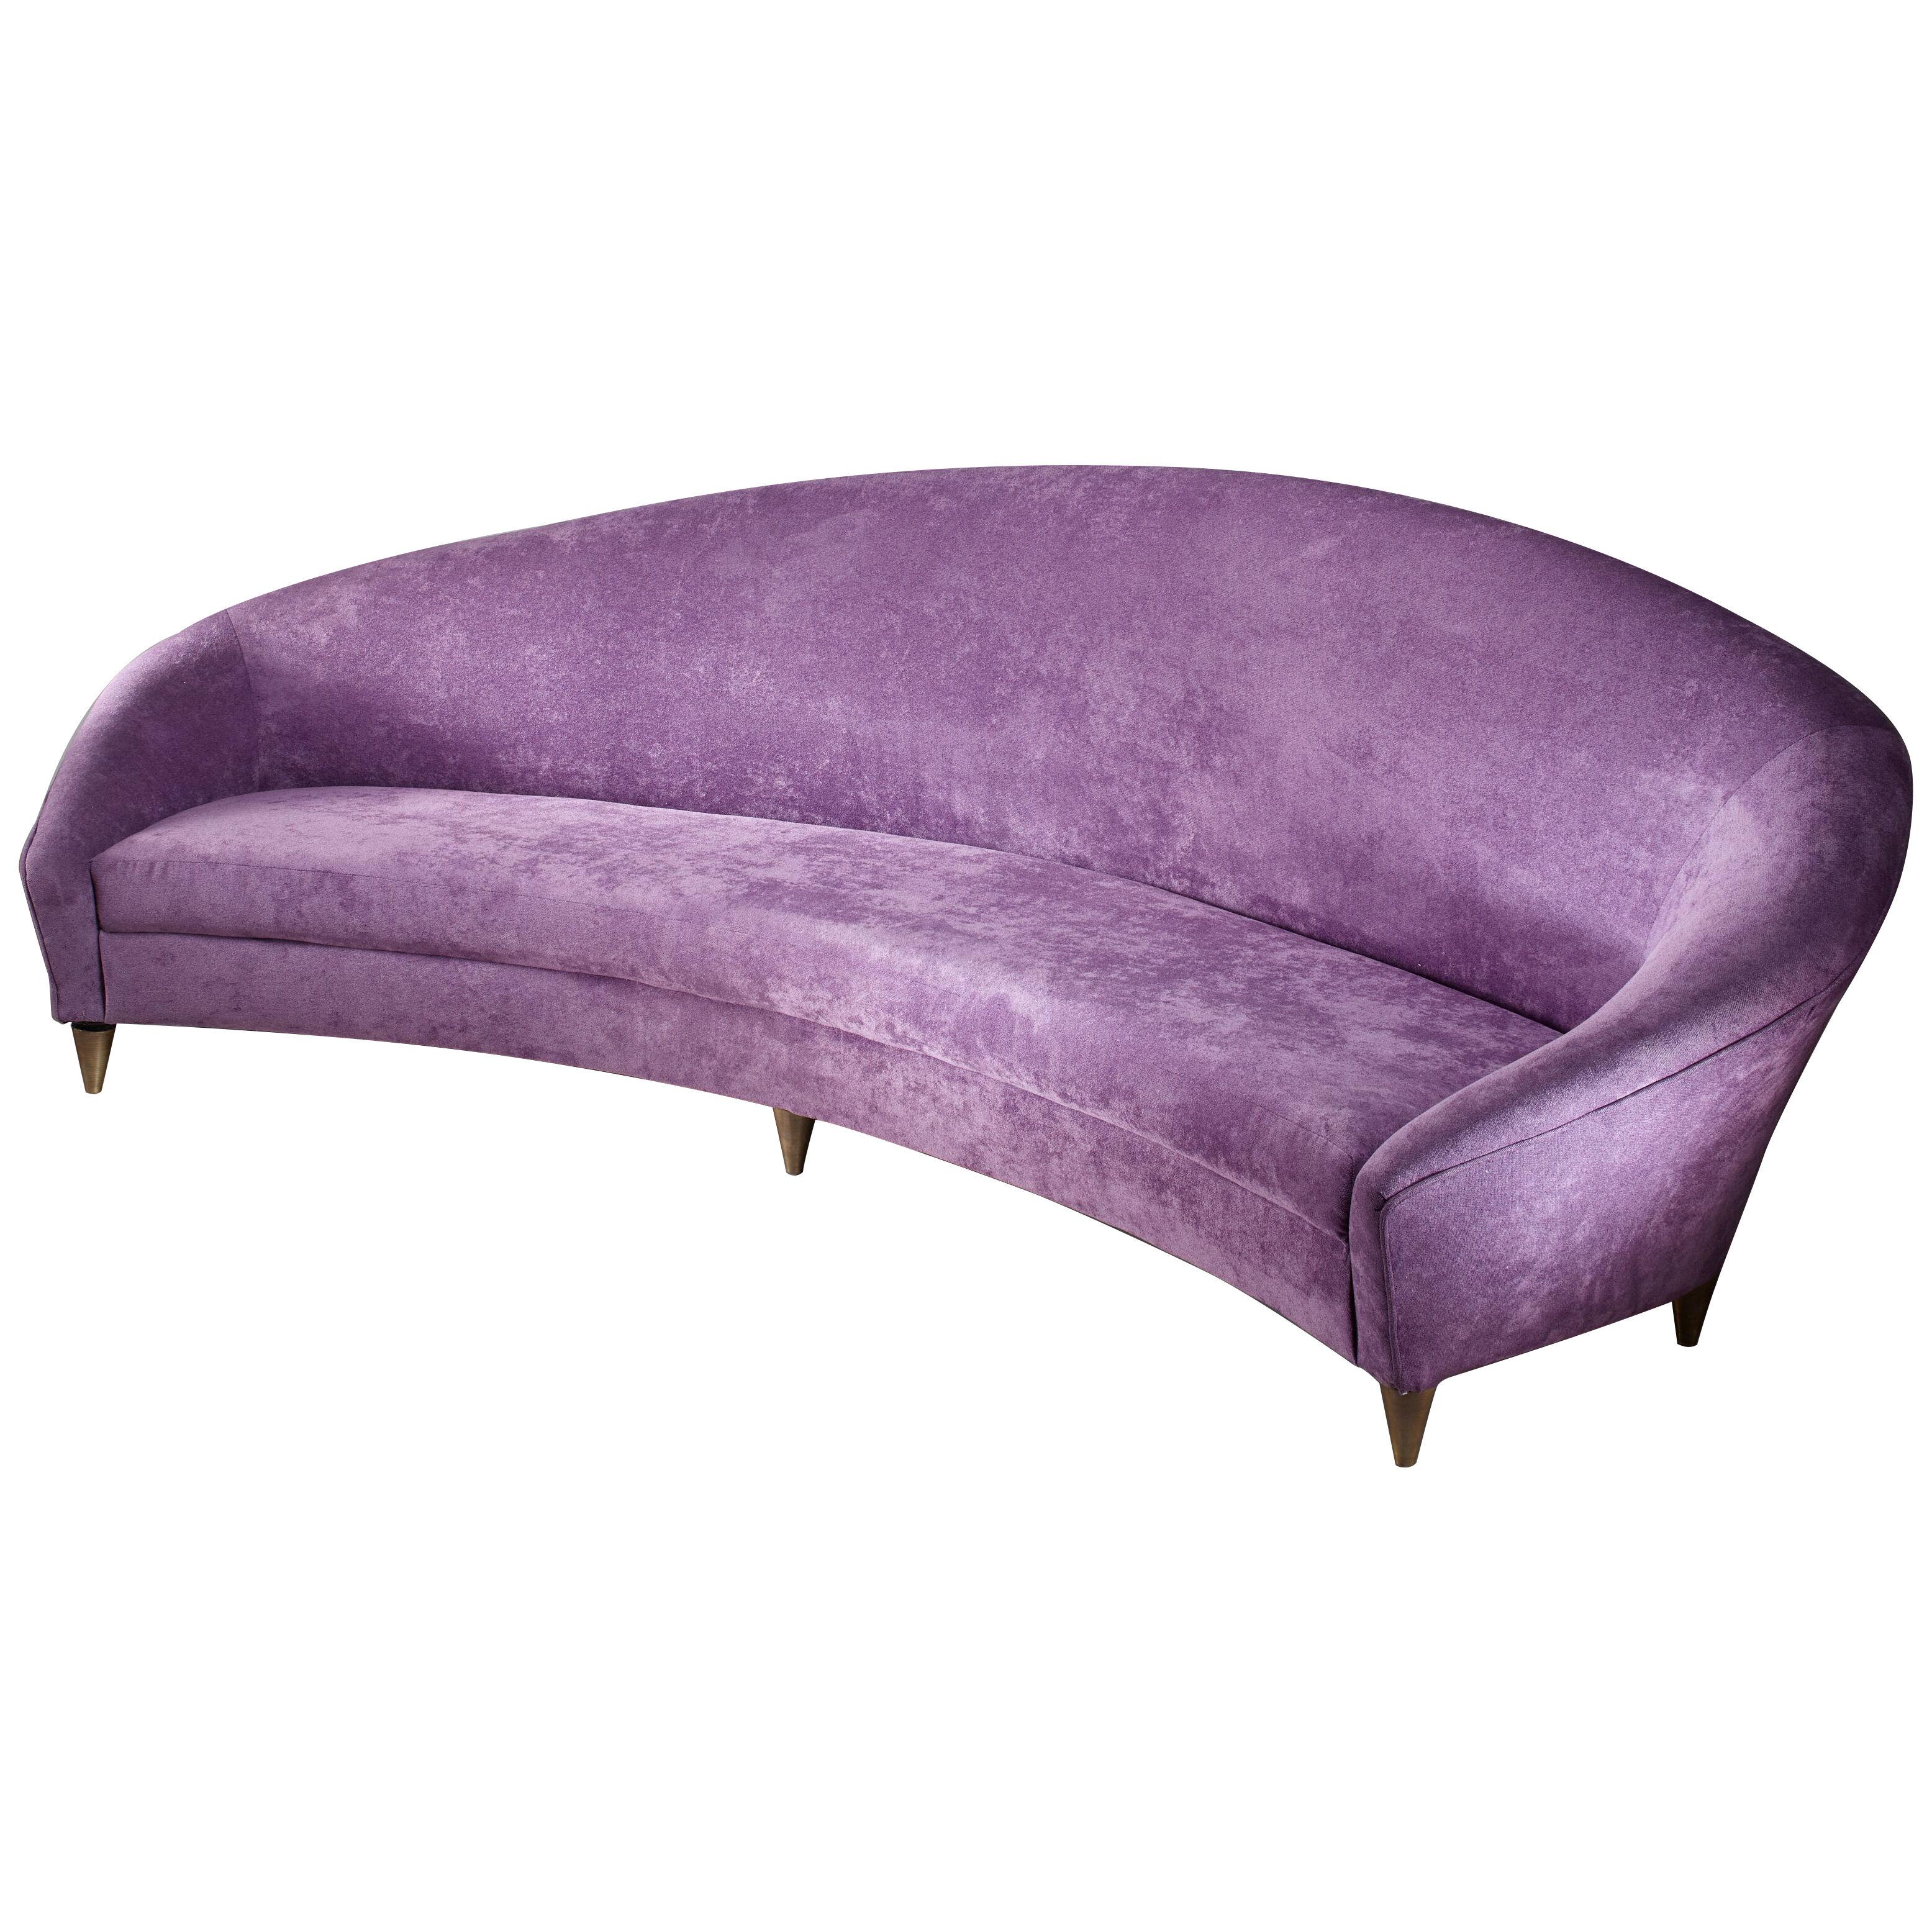 Large Curved Violet Sofa, Italy, 1950s